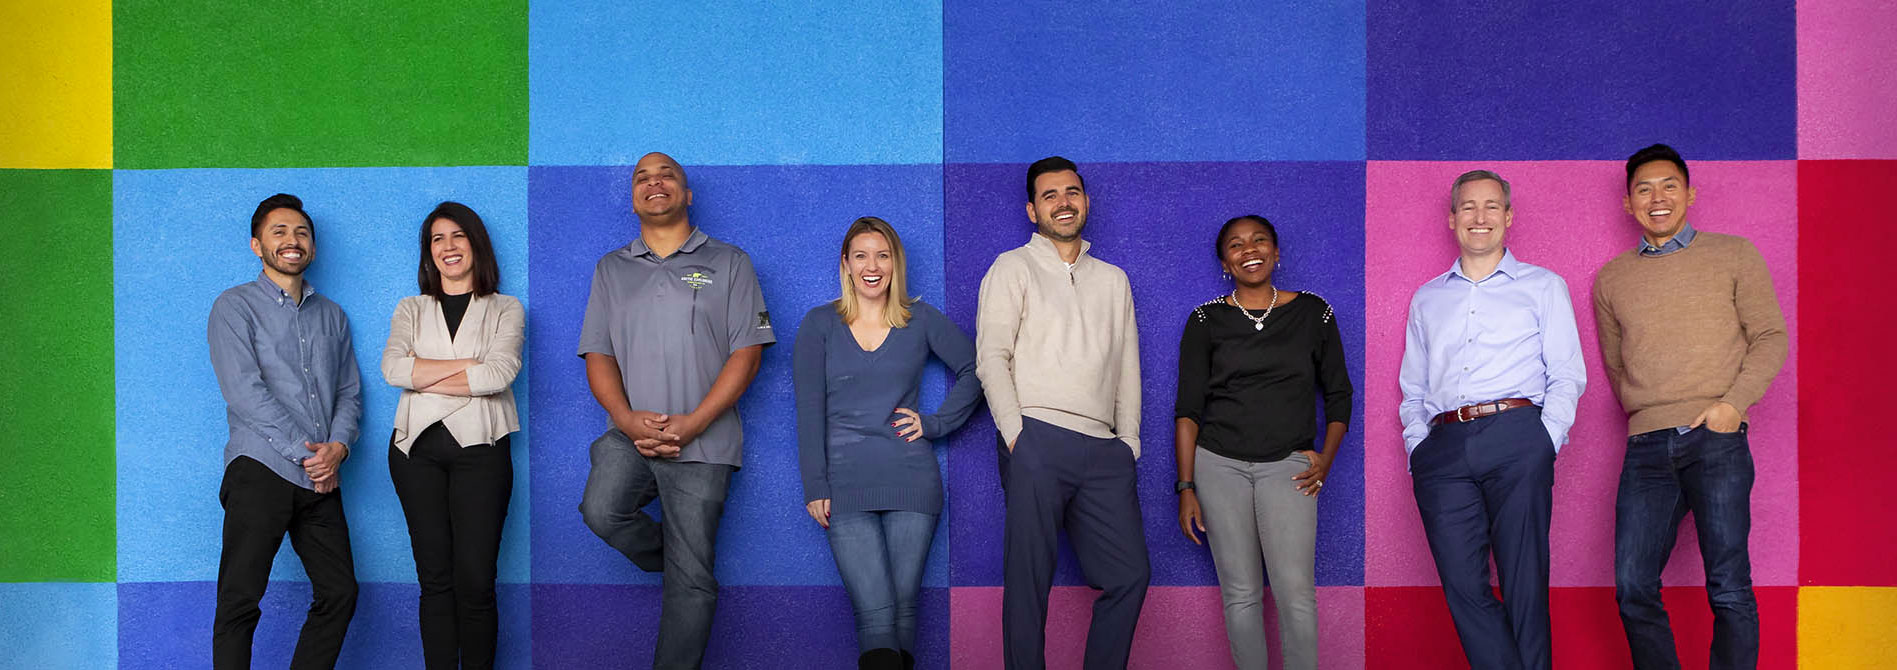 Behr employees standing in front of color squares